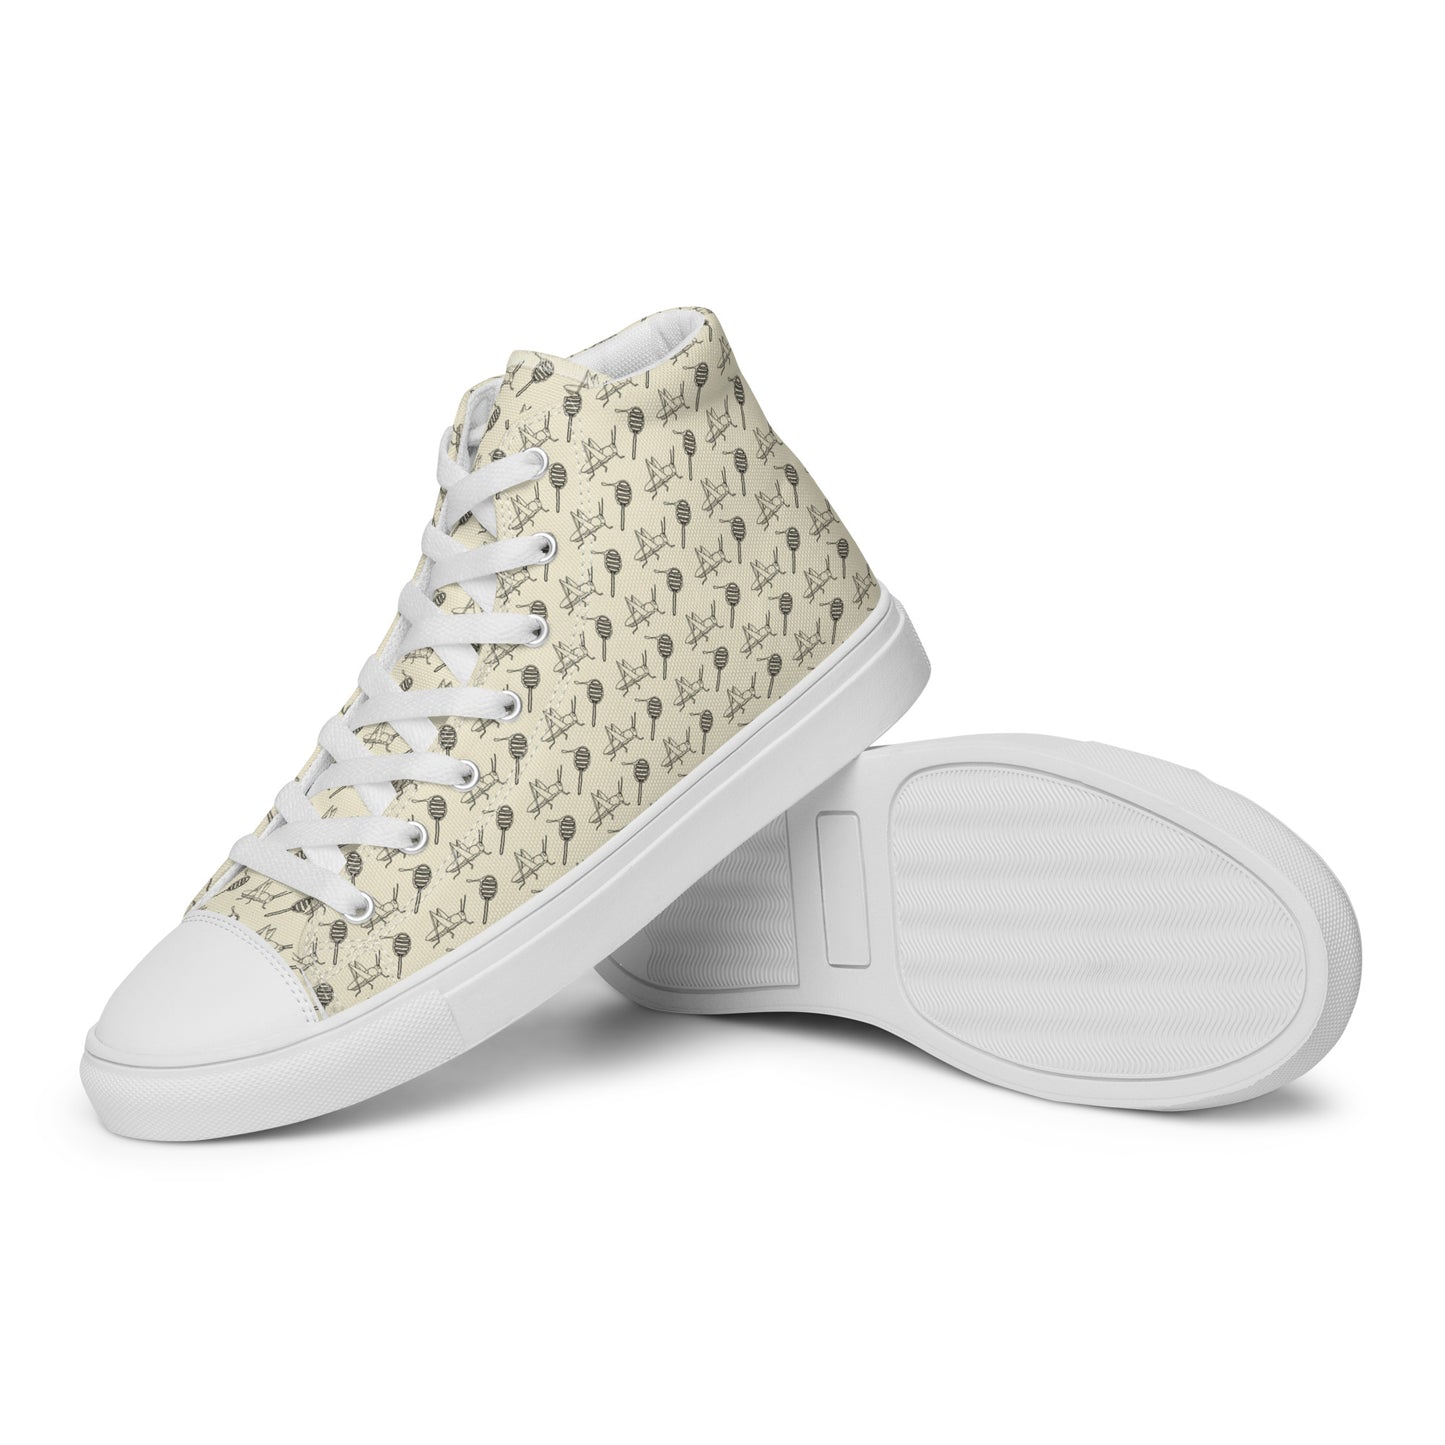 Walking with the Saints | St. John the Baptist—Men’s high top canvas shoes